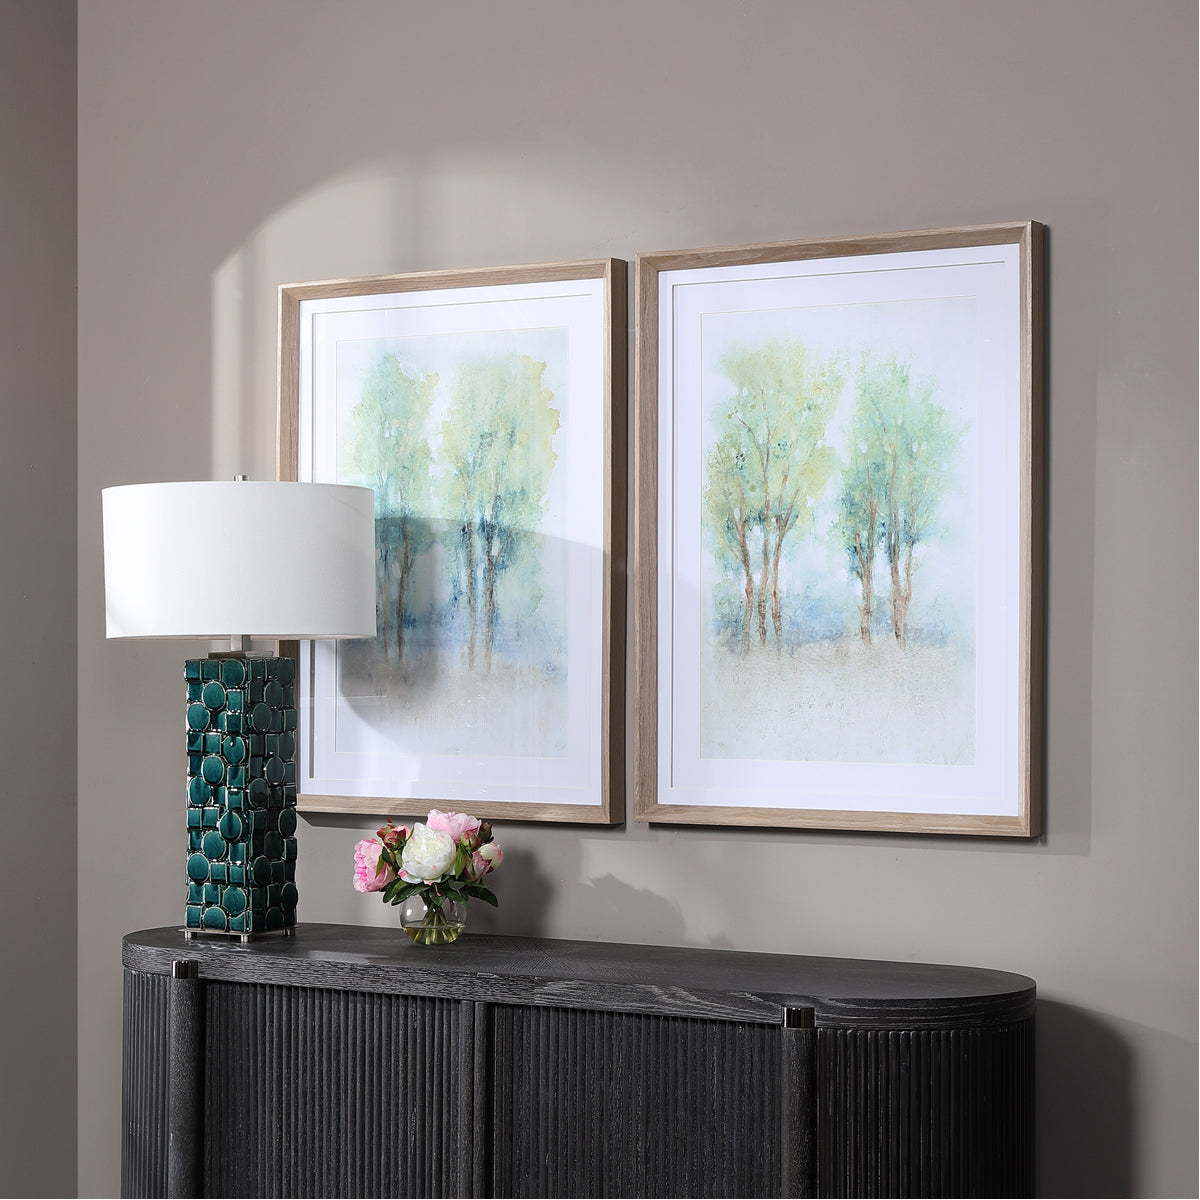 Uttermost Meadow View Framed Prints, Set of 2